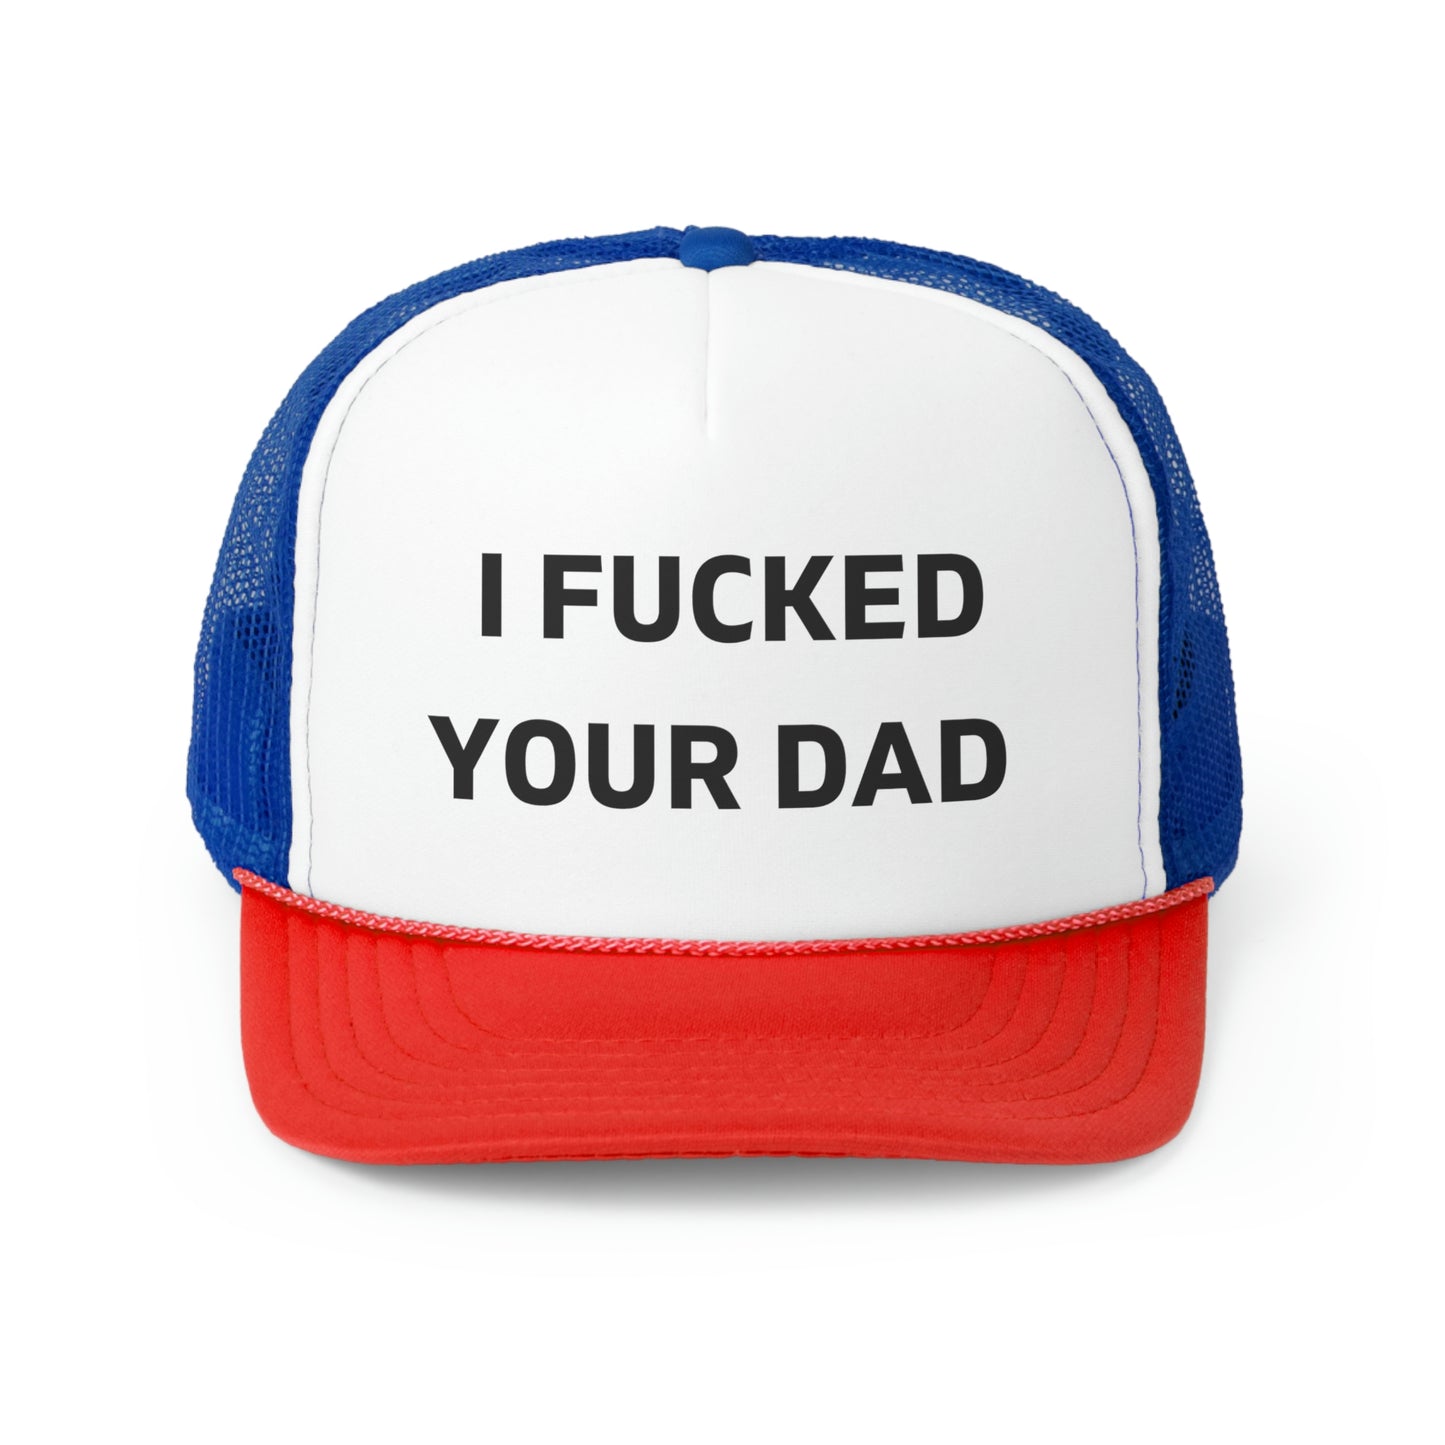 I Fucked Your Dad